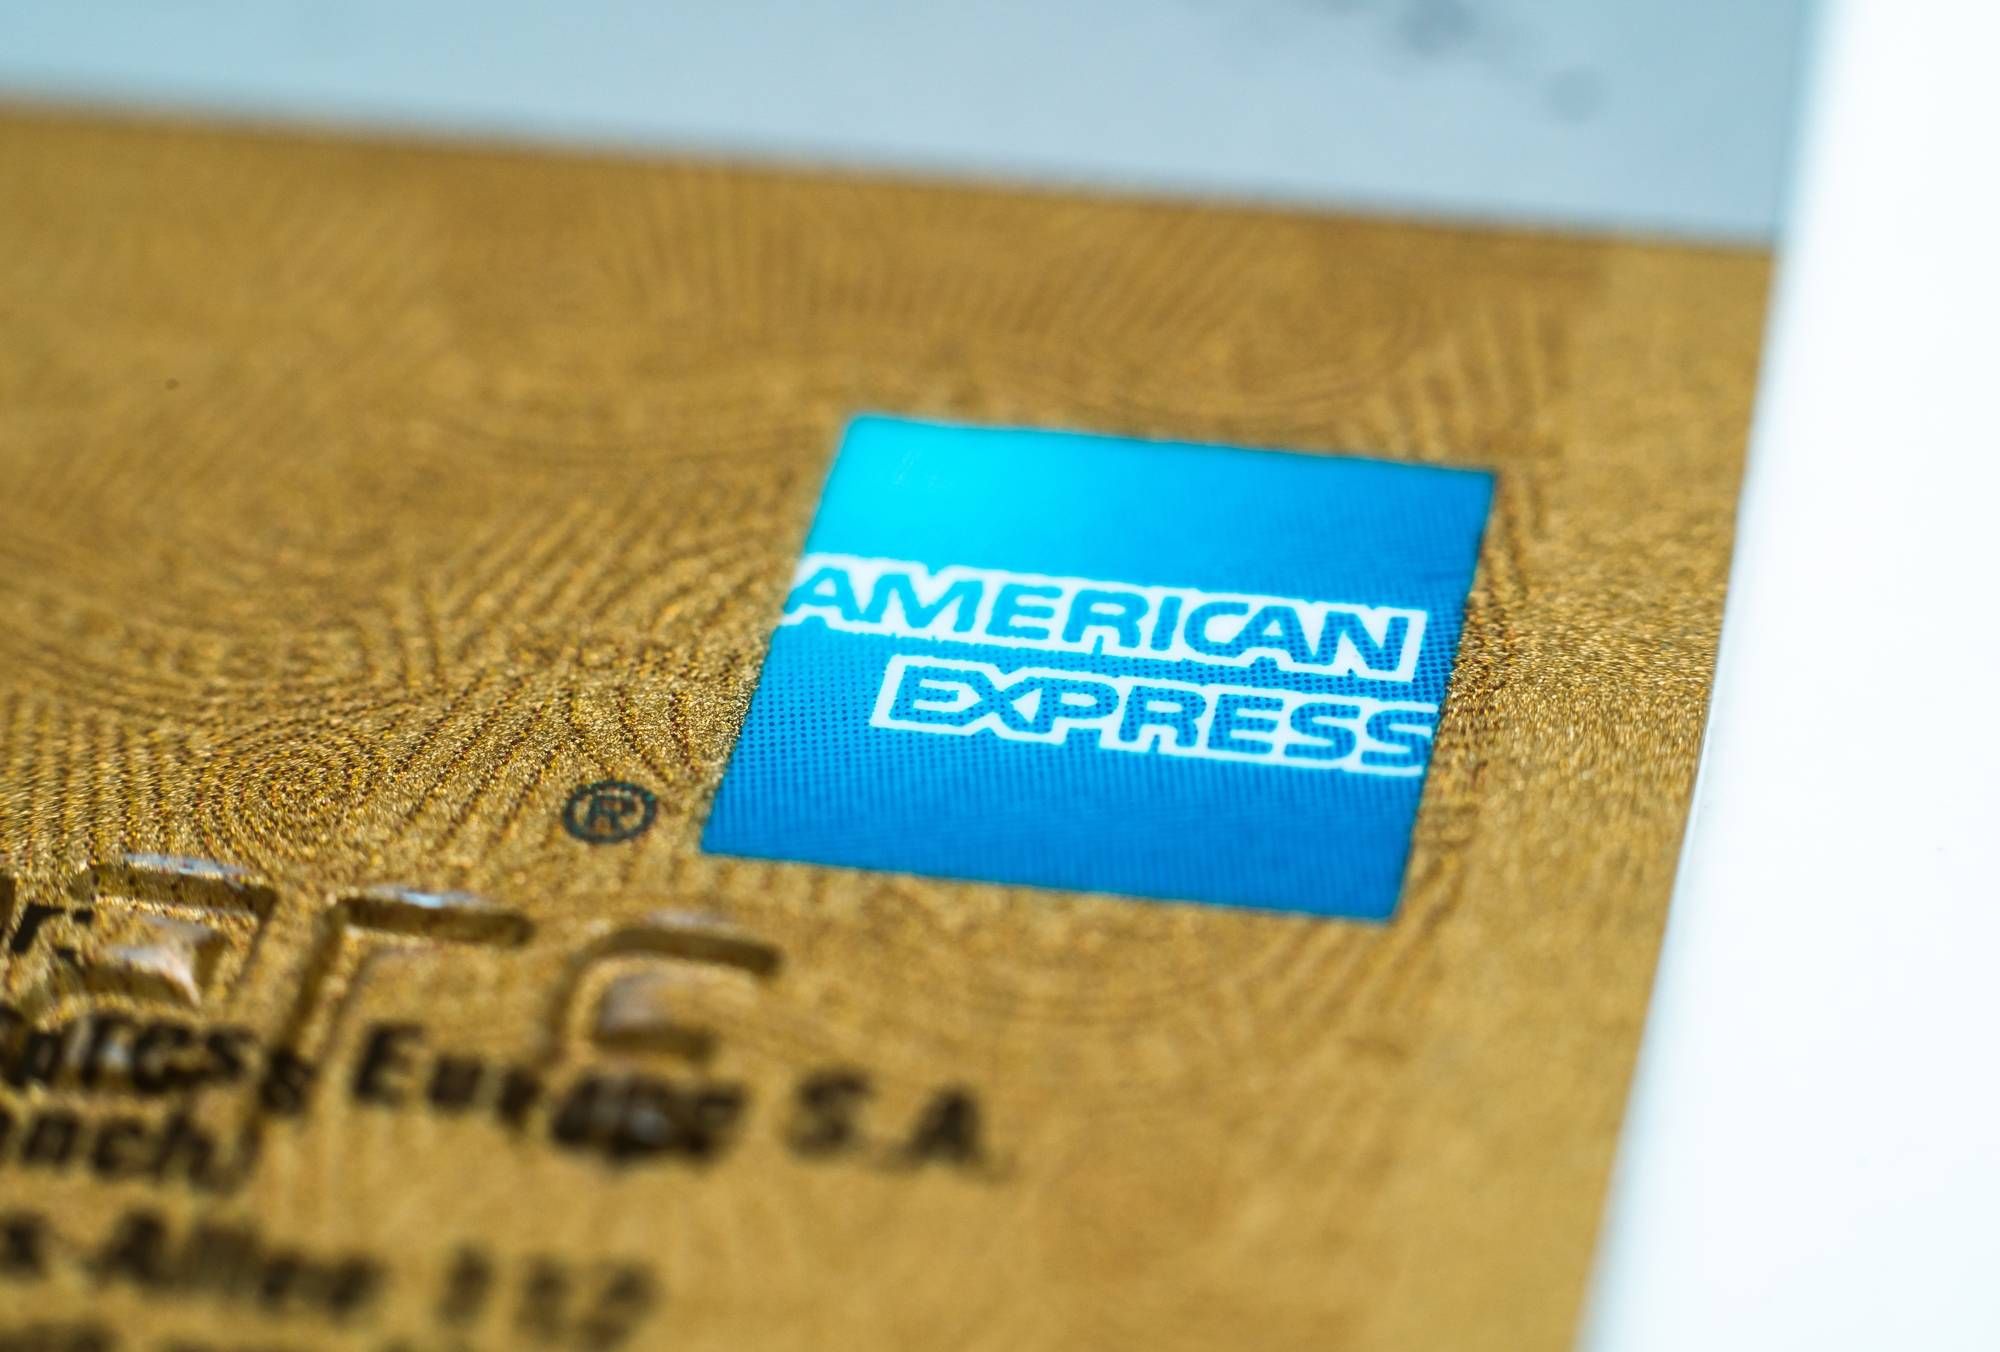 American Express Class Action Lawsuit Alleges Misleading Billing Policy